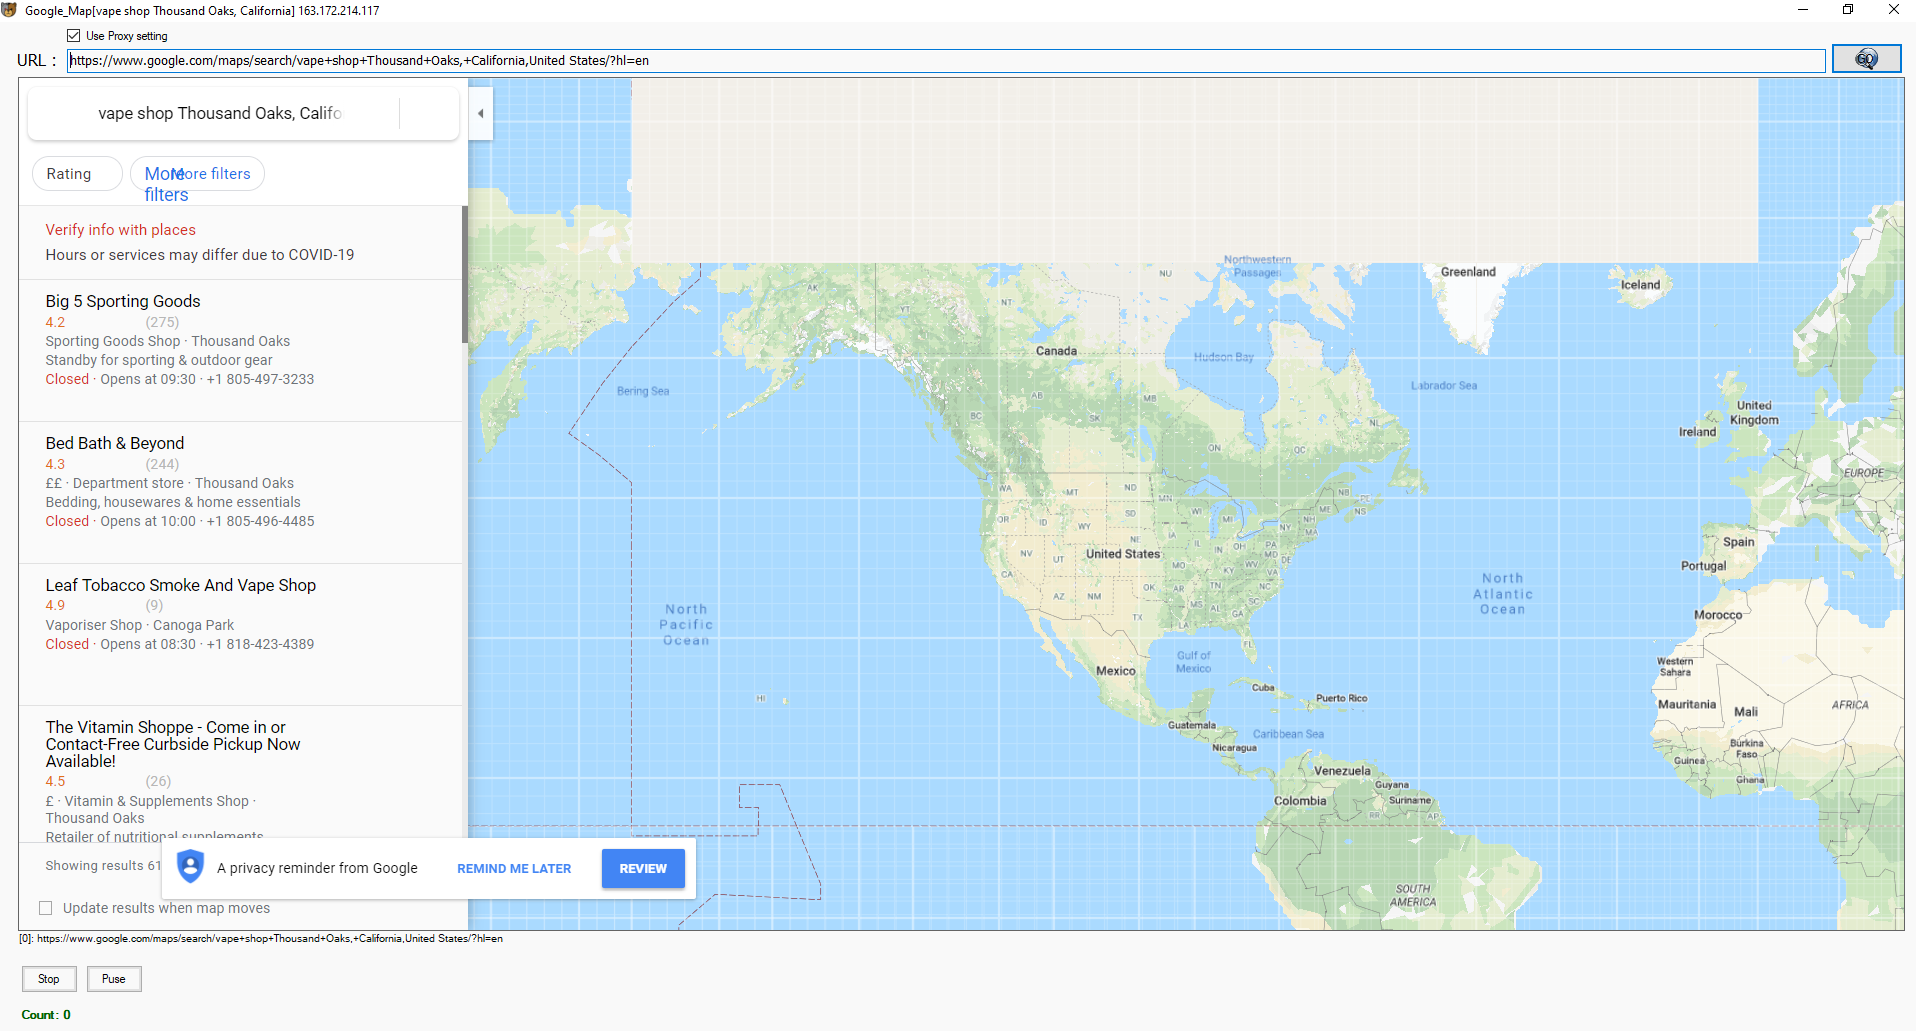 How to use the Google Maps Email Extractor and Google Maps Scraper